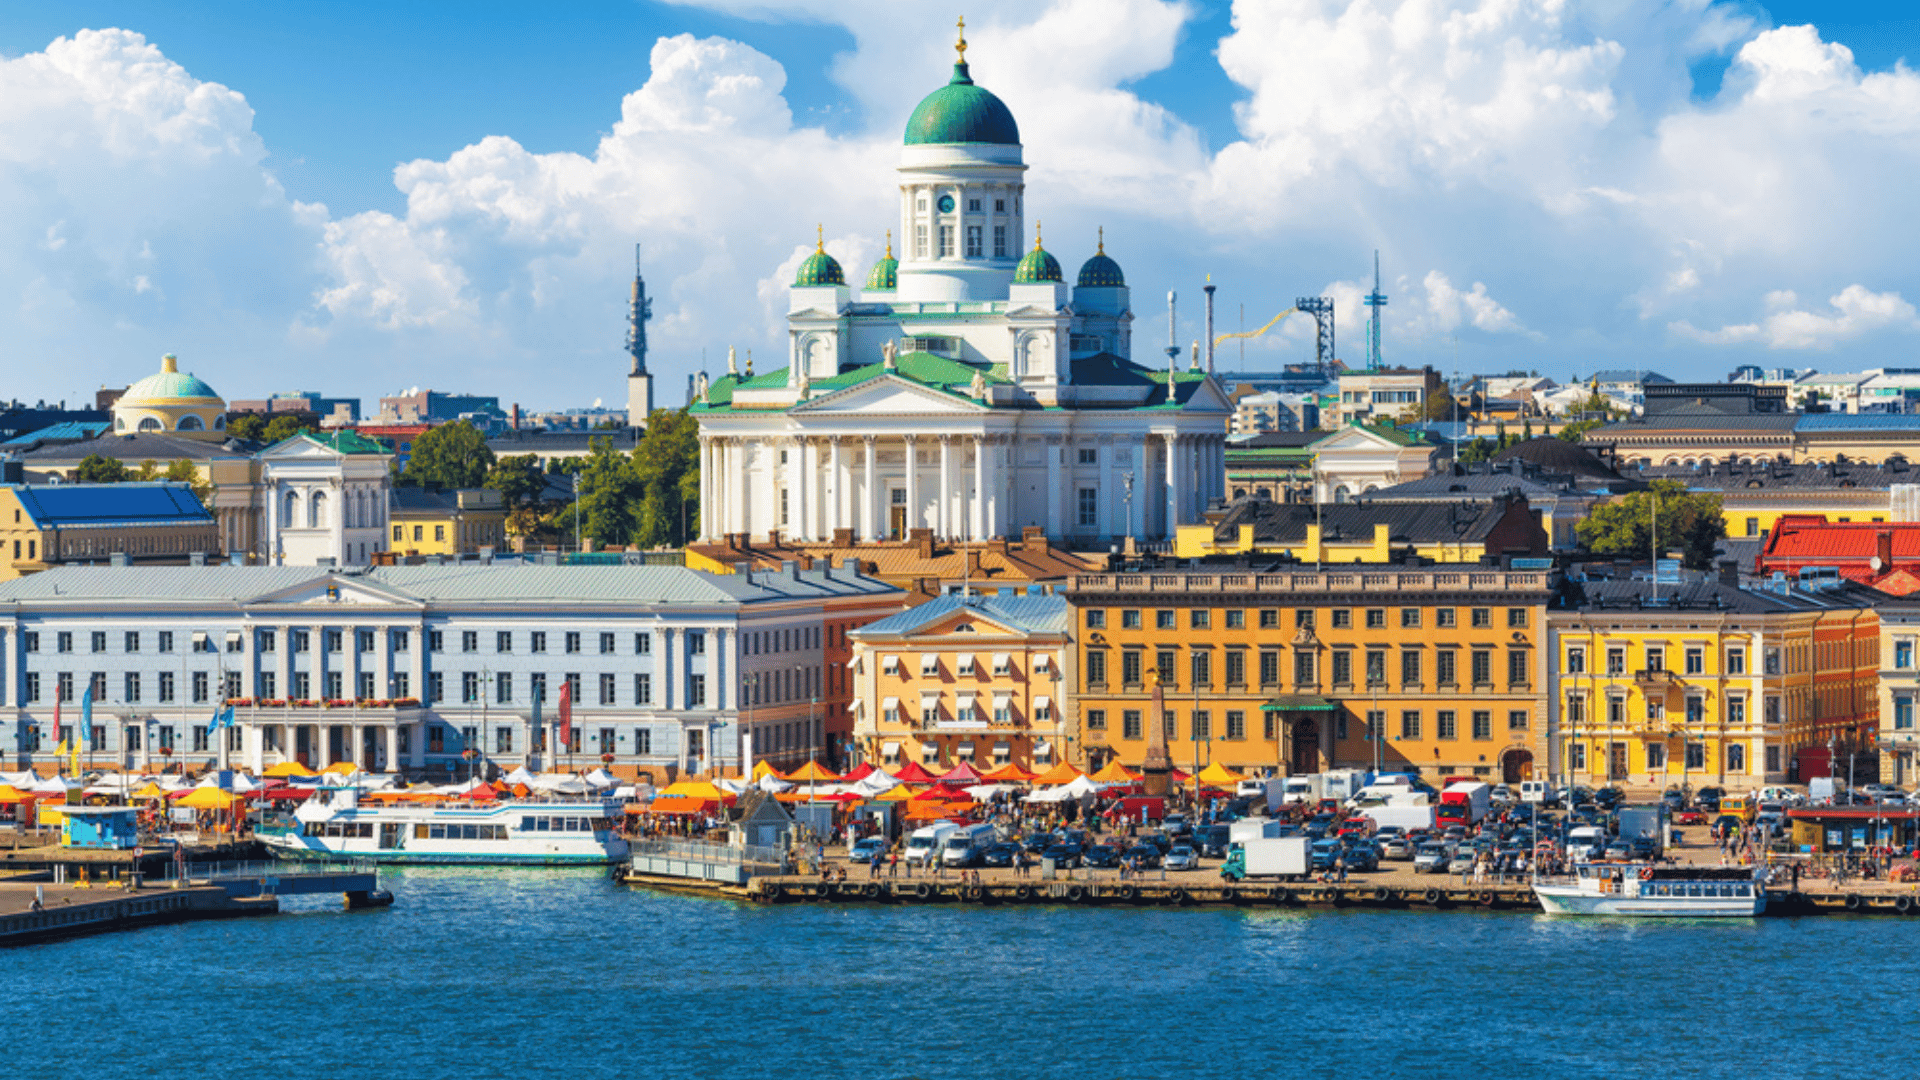 Helsinki, Finland Carbon Neutral Goal Sustainable Cities